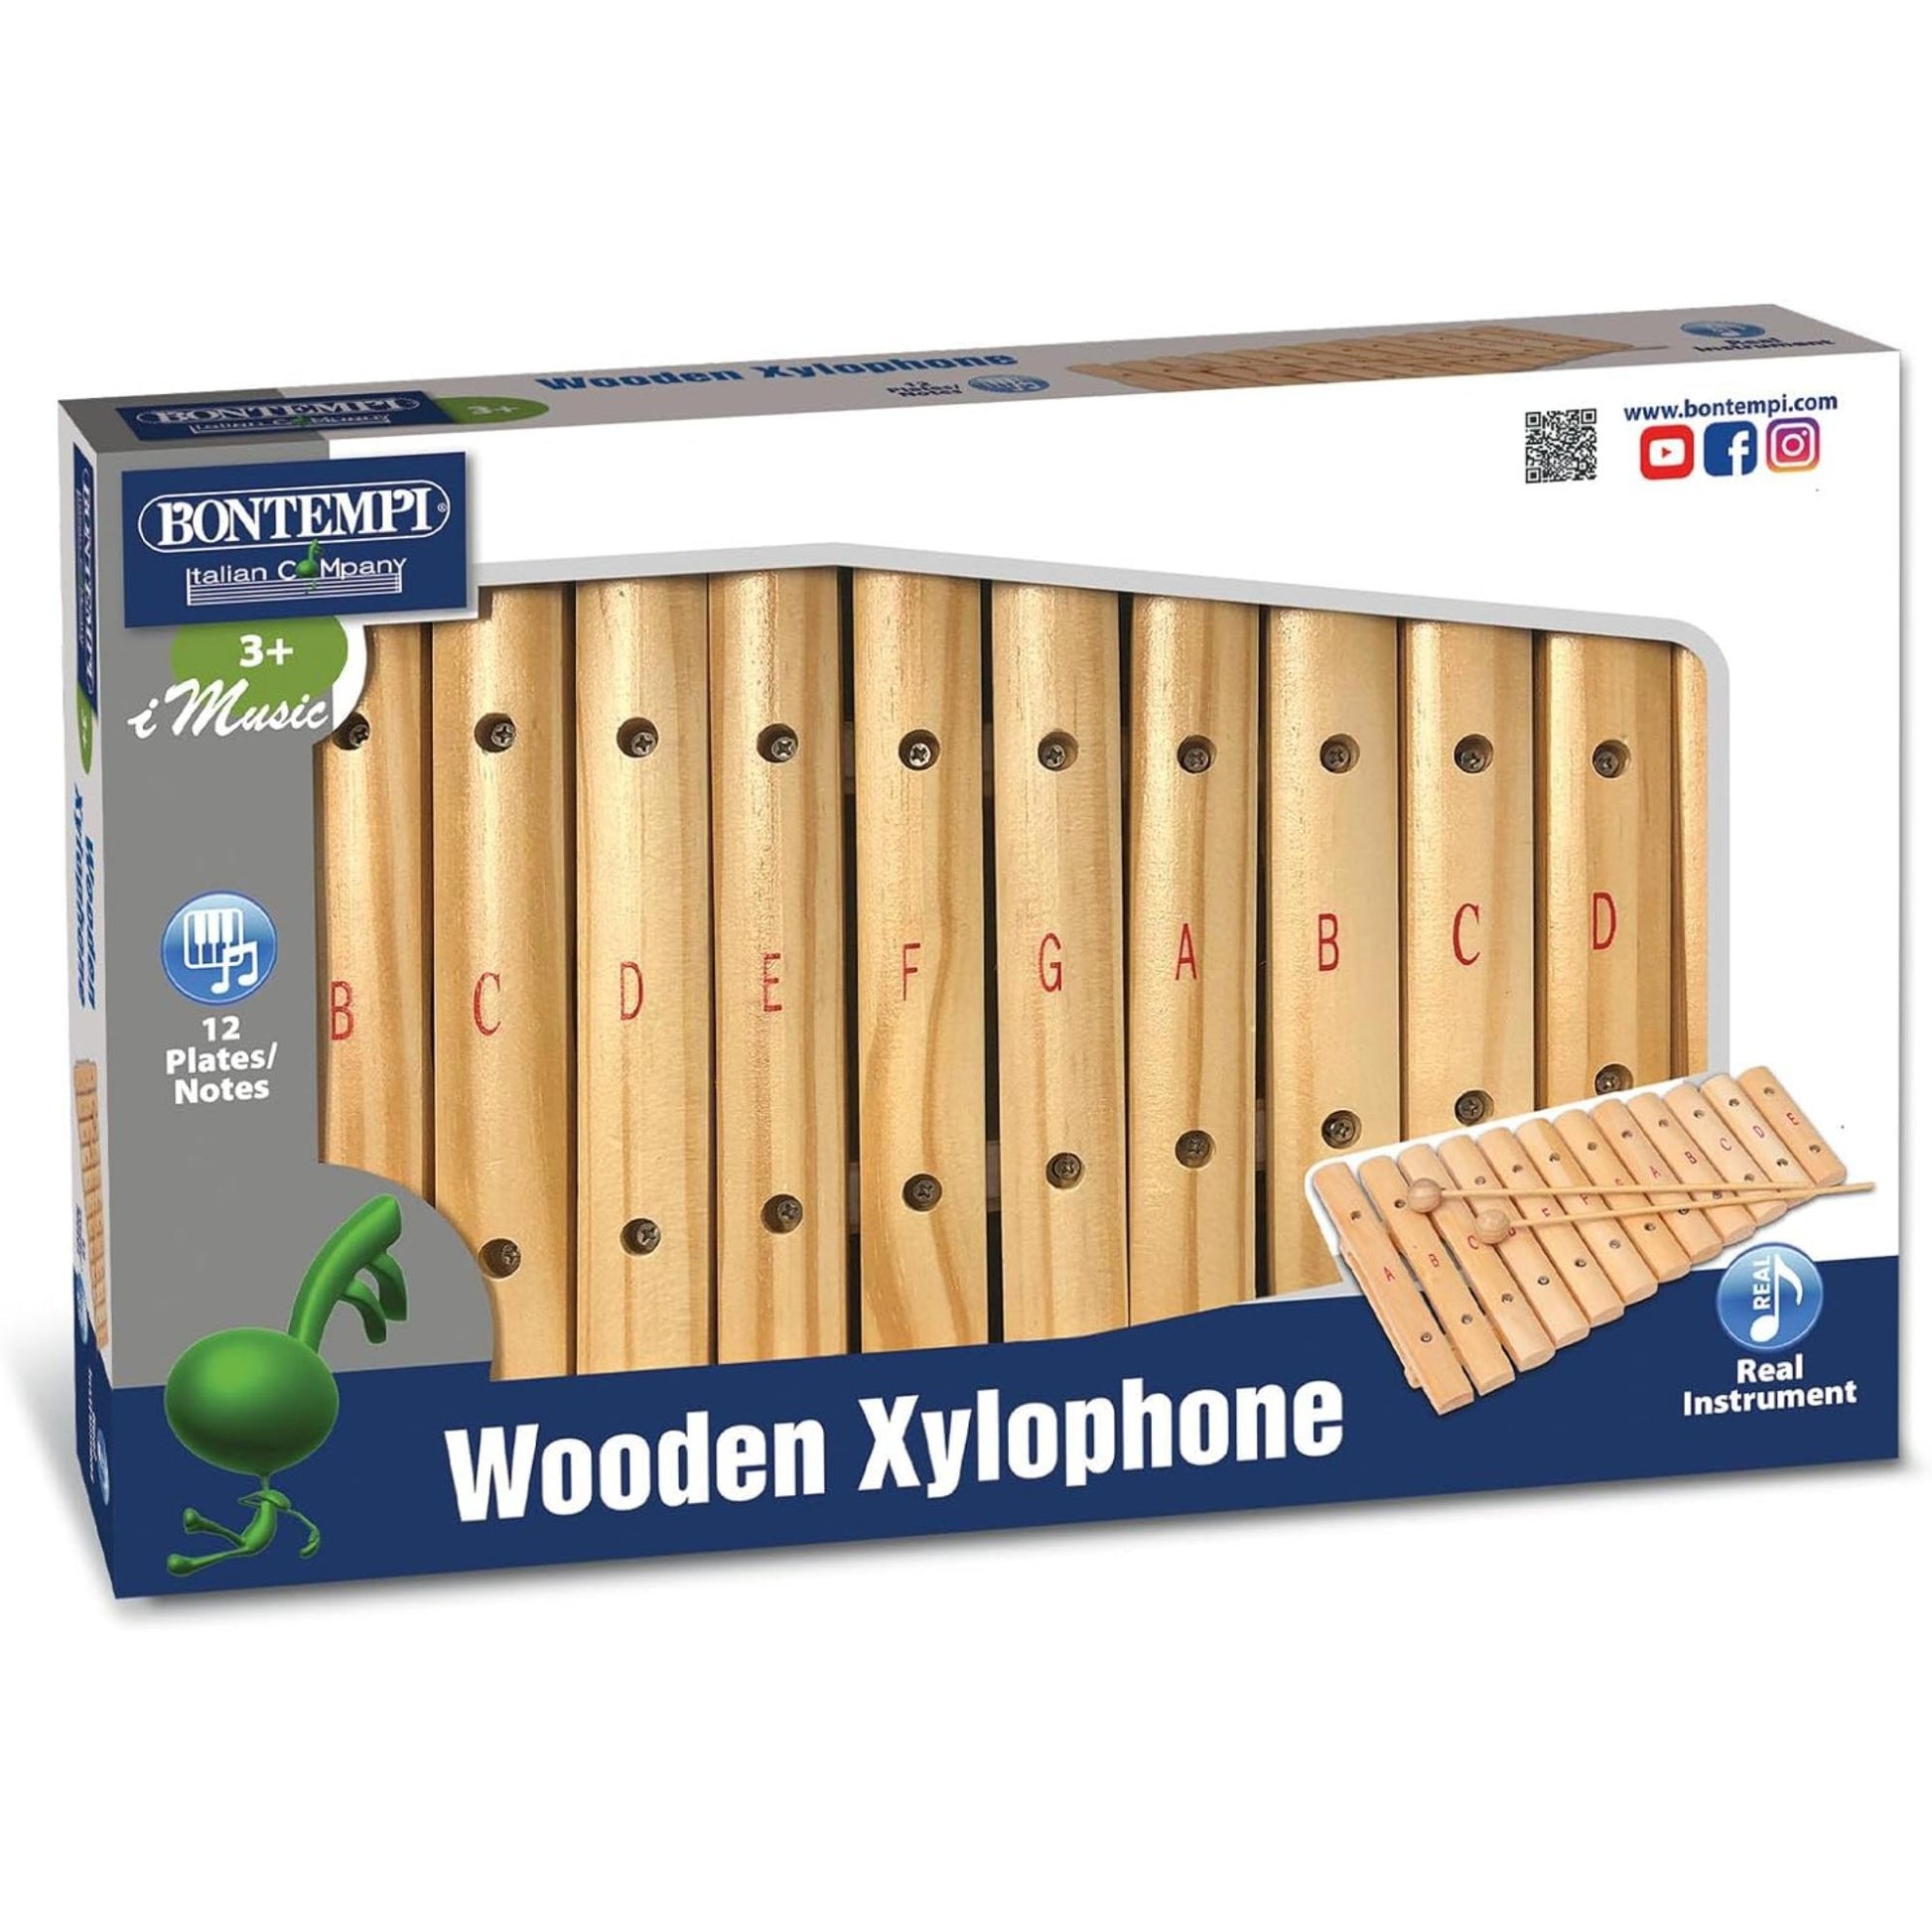 12 note wooden xylophone